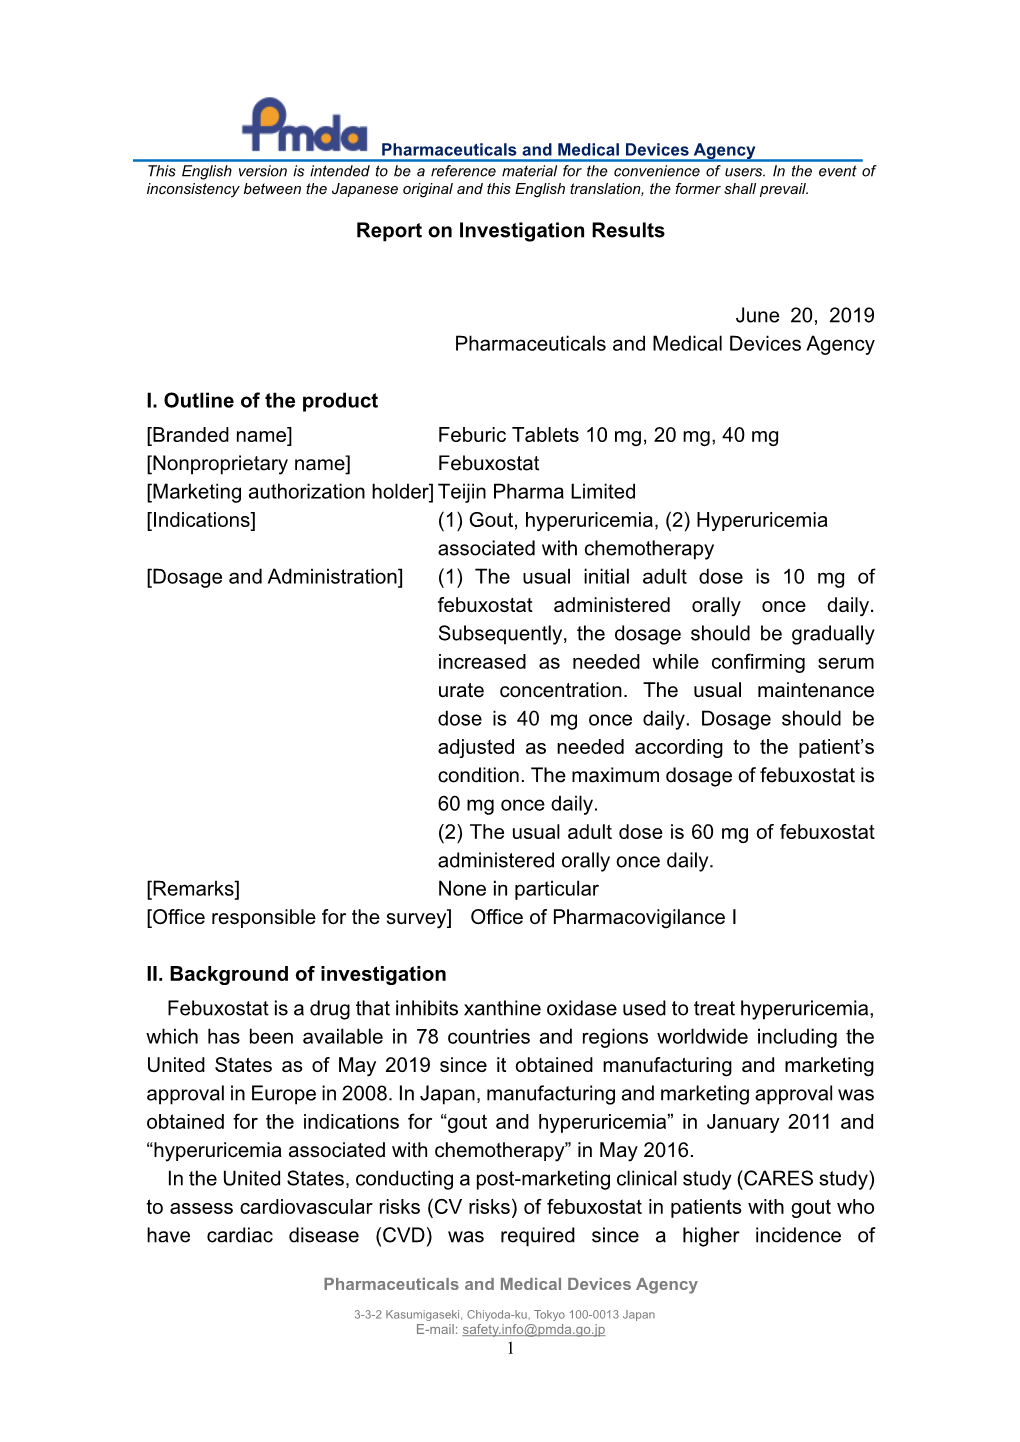 Report on Investigation Results June 20, 2019 Pharmaceuticals And